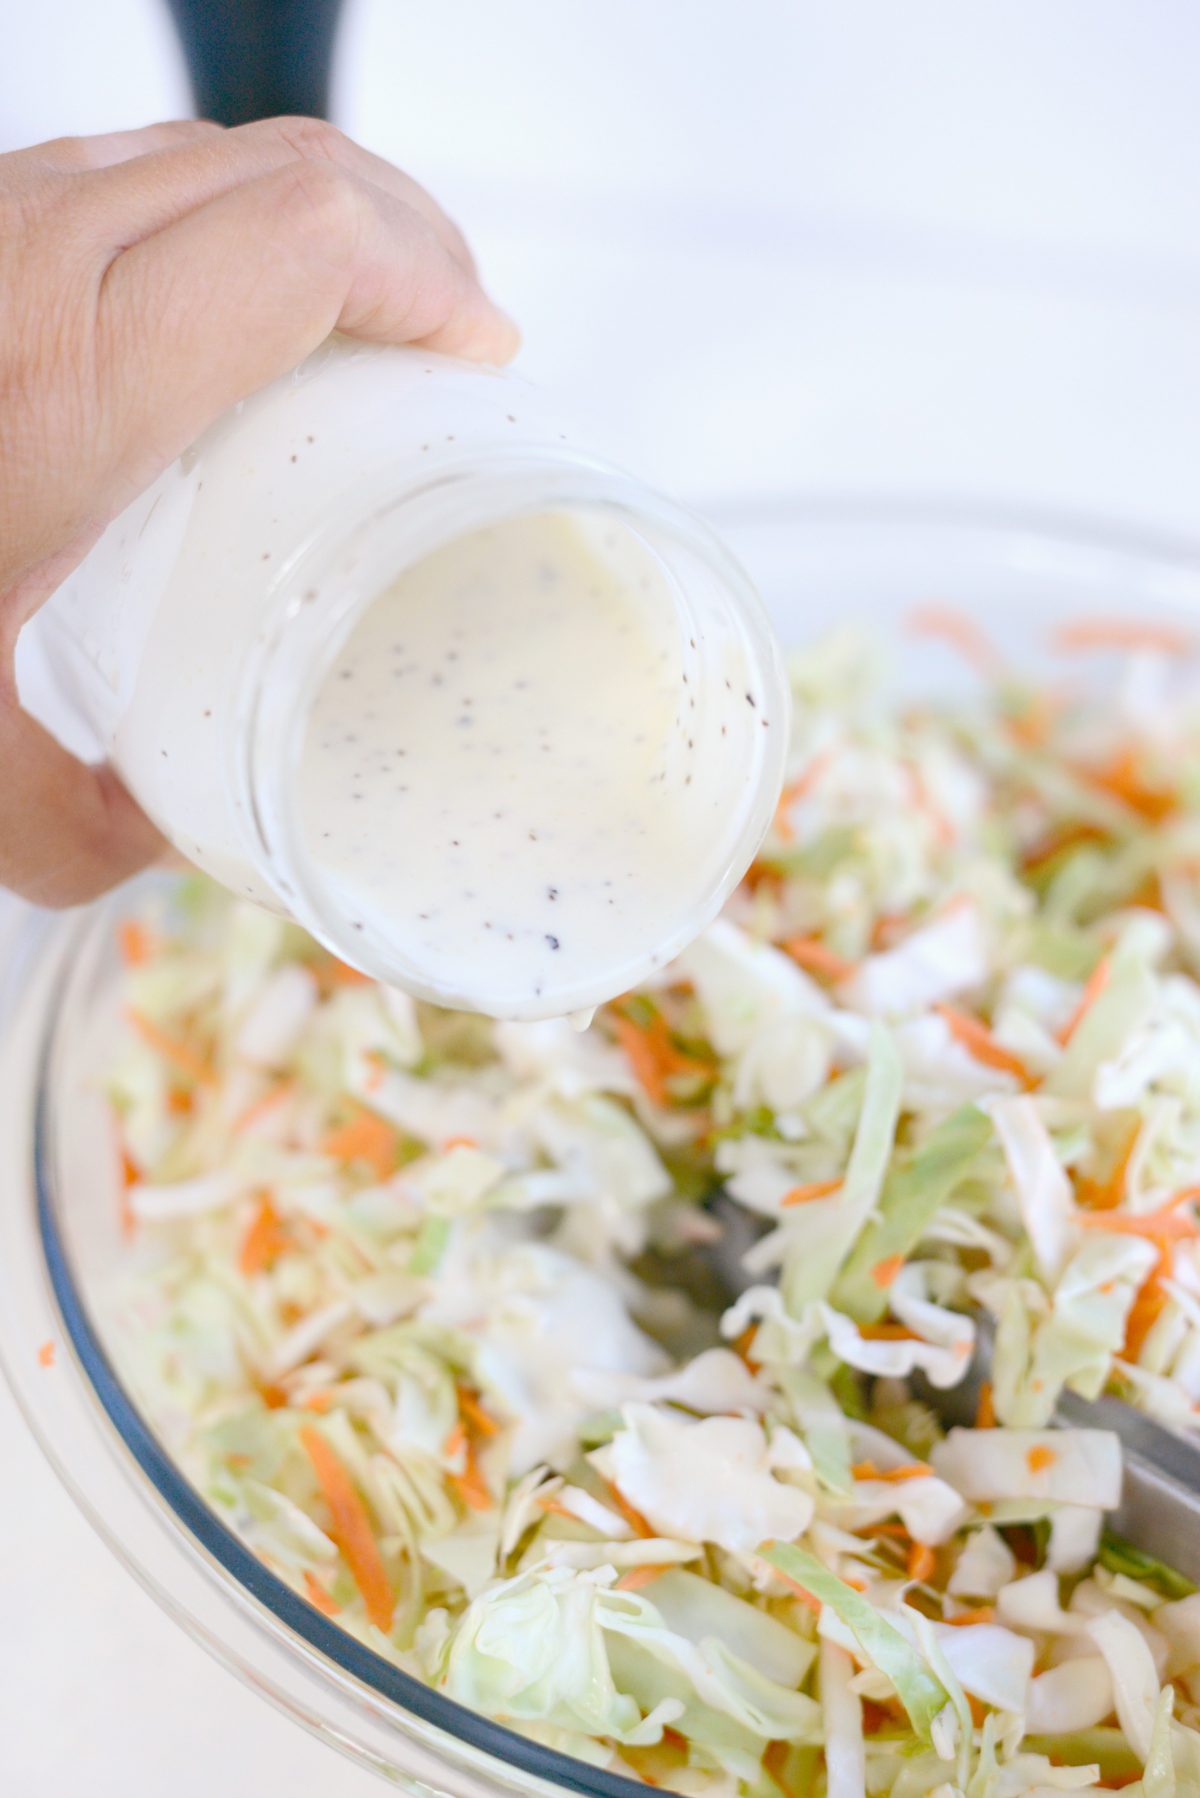 Pour in desired amount of coleslaw dressing